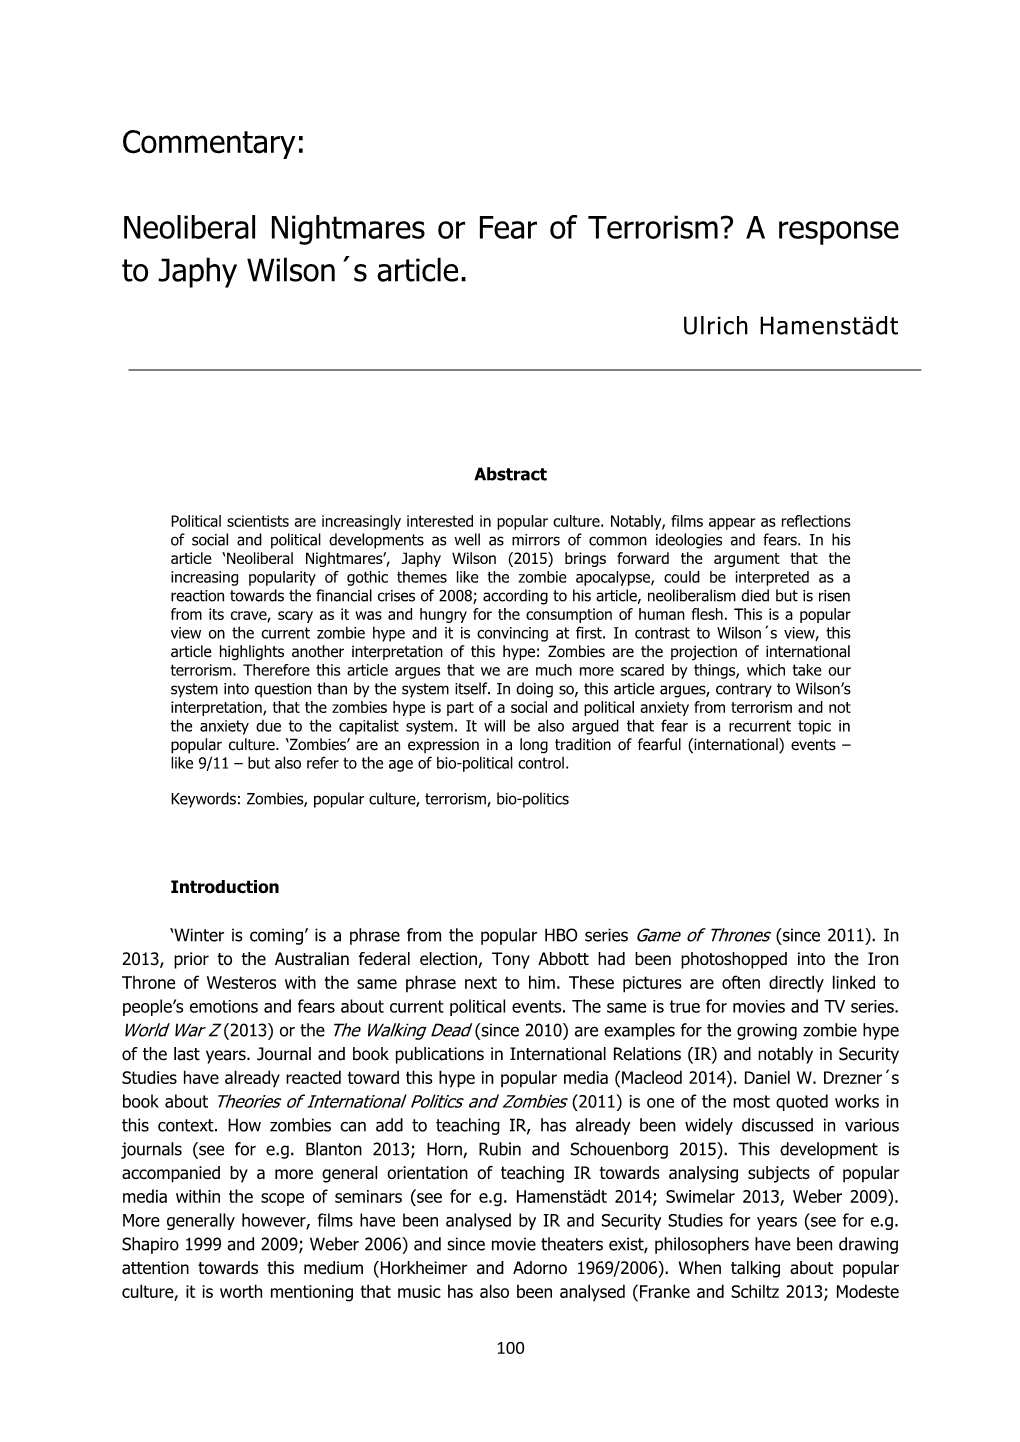 Commentary: Neoliberal Nightmares Or Fear of Terrorism? a Response To